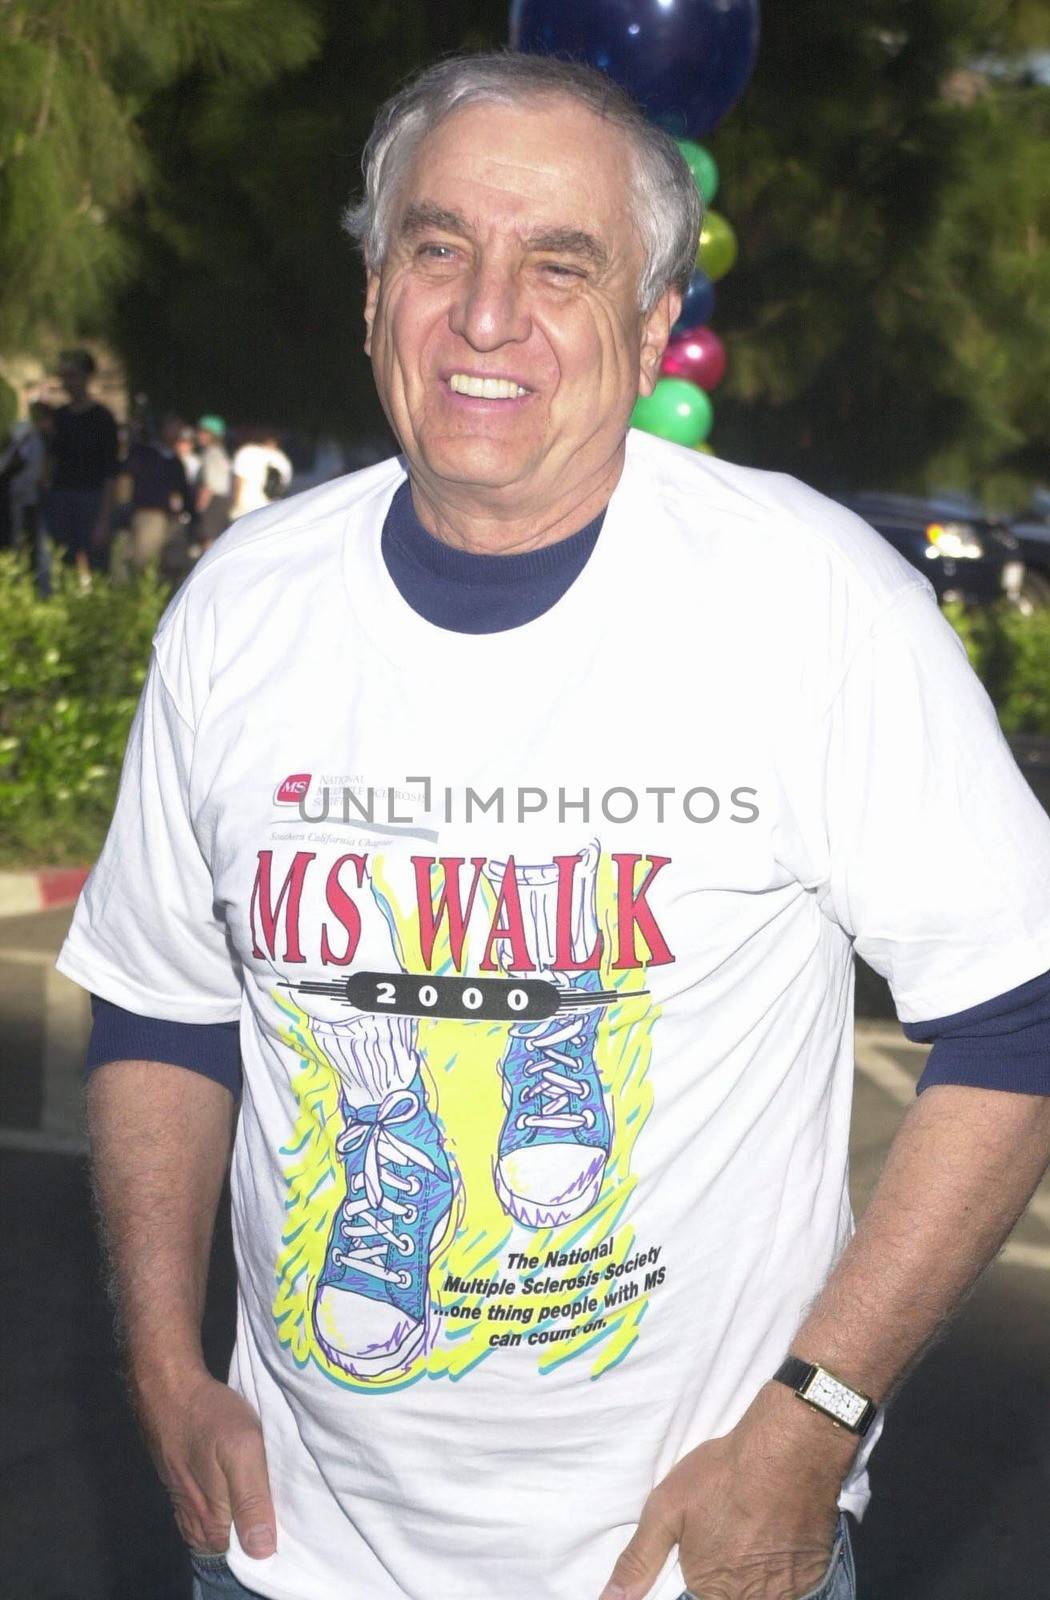 Garry Marshall at the MS Walk 2000, where the cast of "Laverne and Shirley" reunited. Burbank, 04-09-00